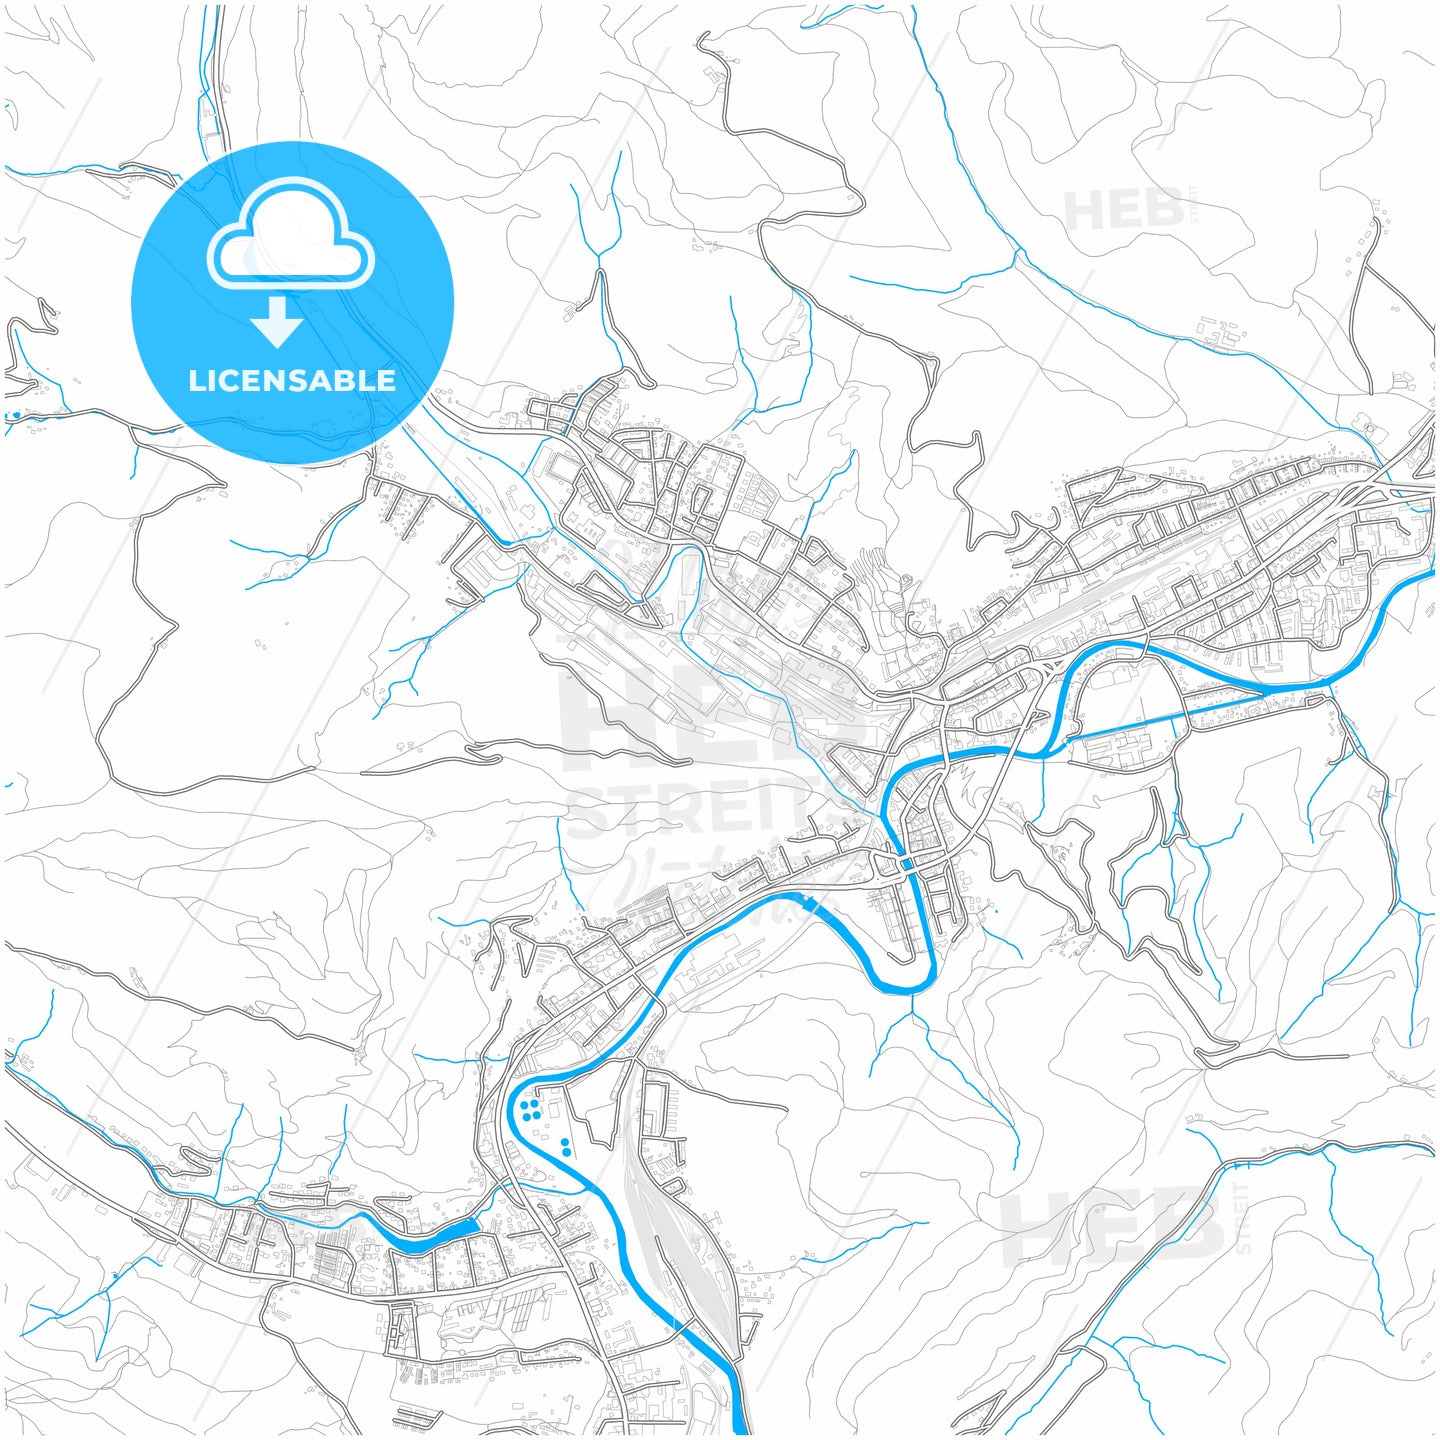 Kapfenberg, Styria, Austria, city map with high quality roads.